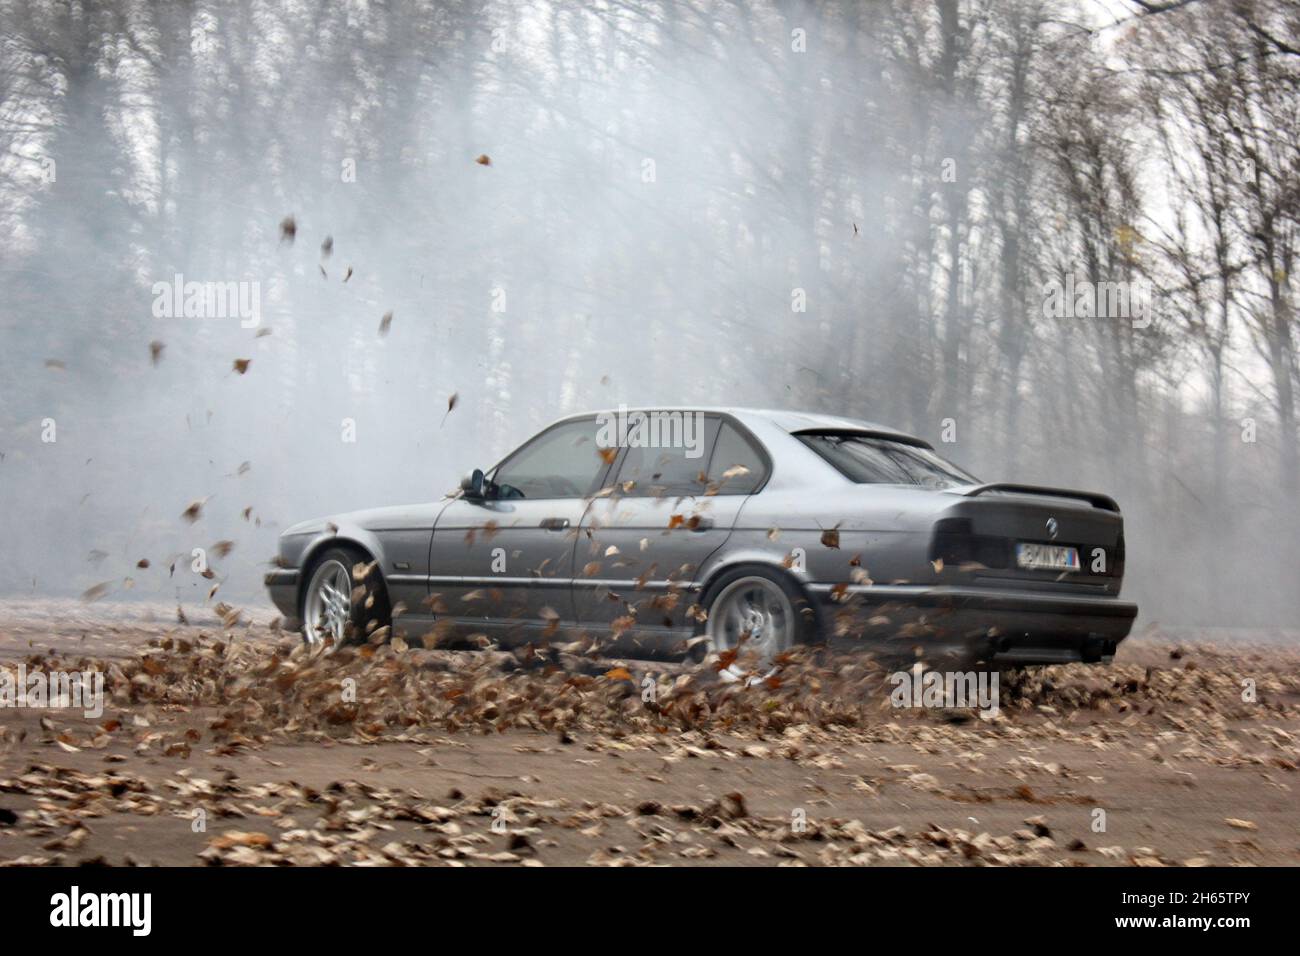 BMW M5, model year 2005-, black, driving, diagonal from the front, frontal  view, test track, Drift, drifting Stock Photo - Alamy